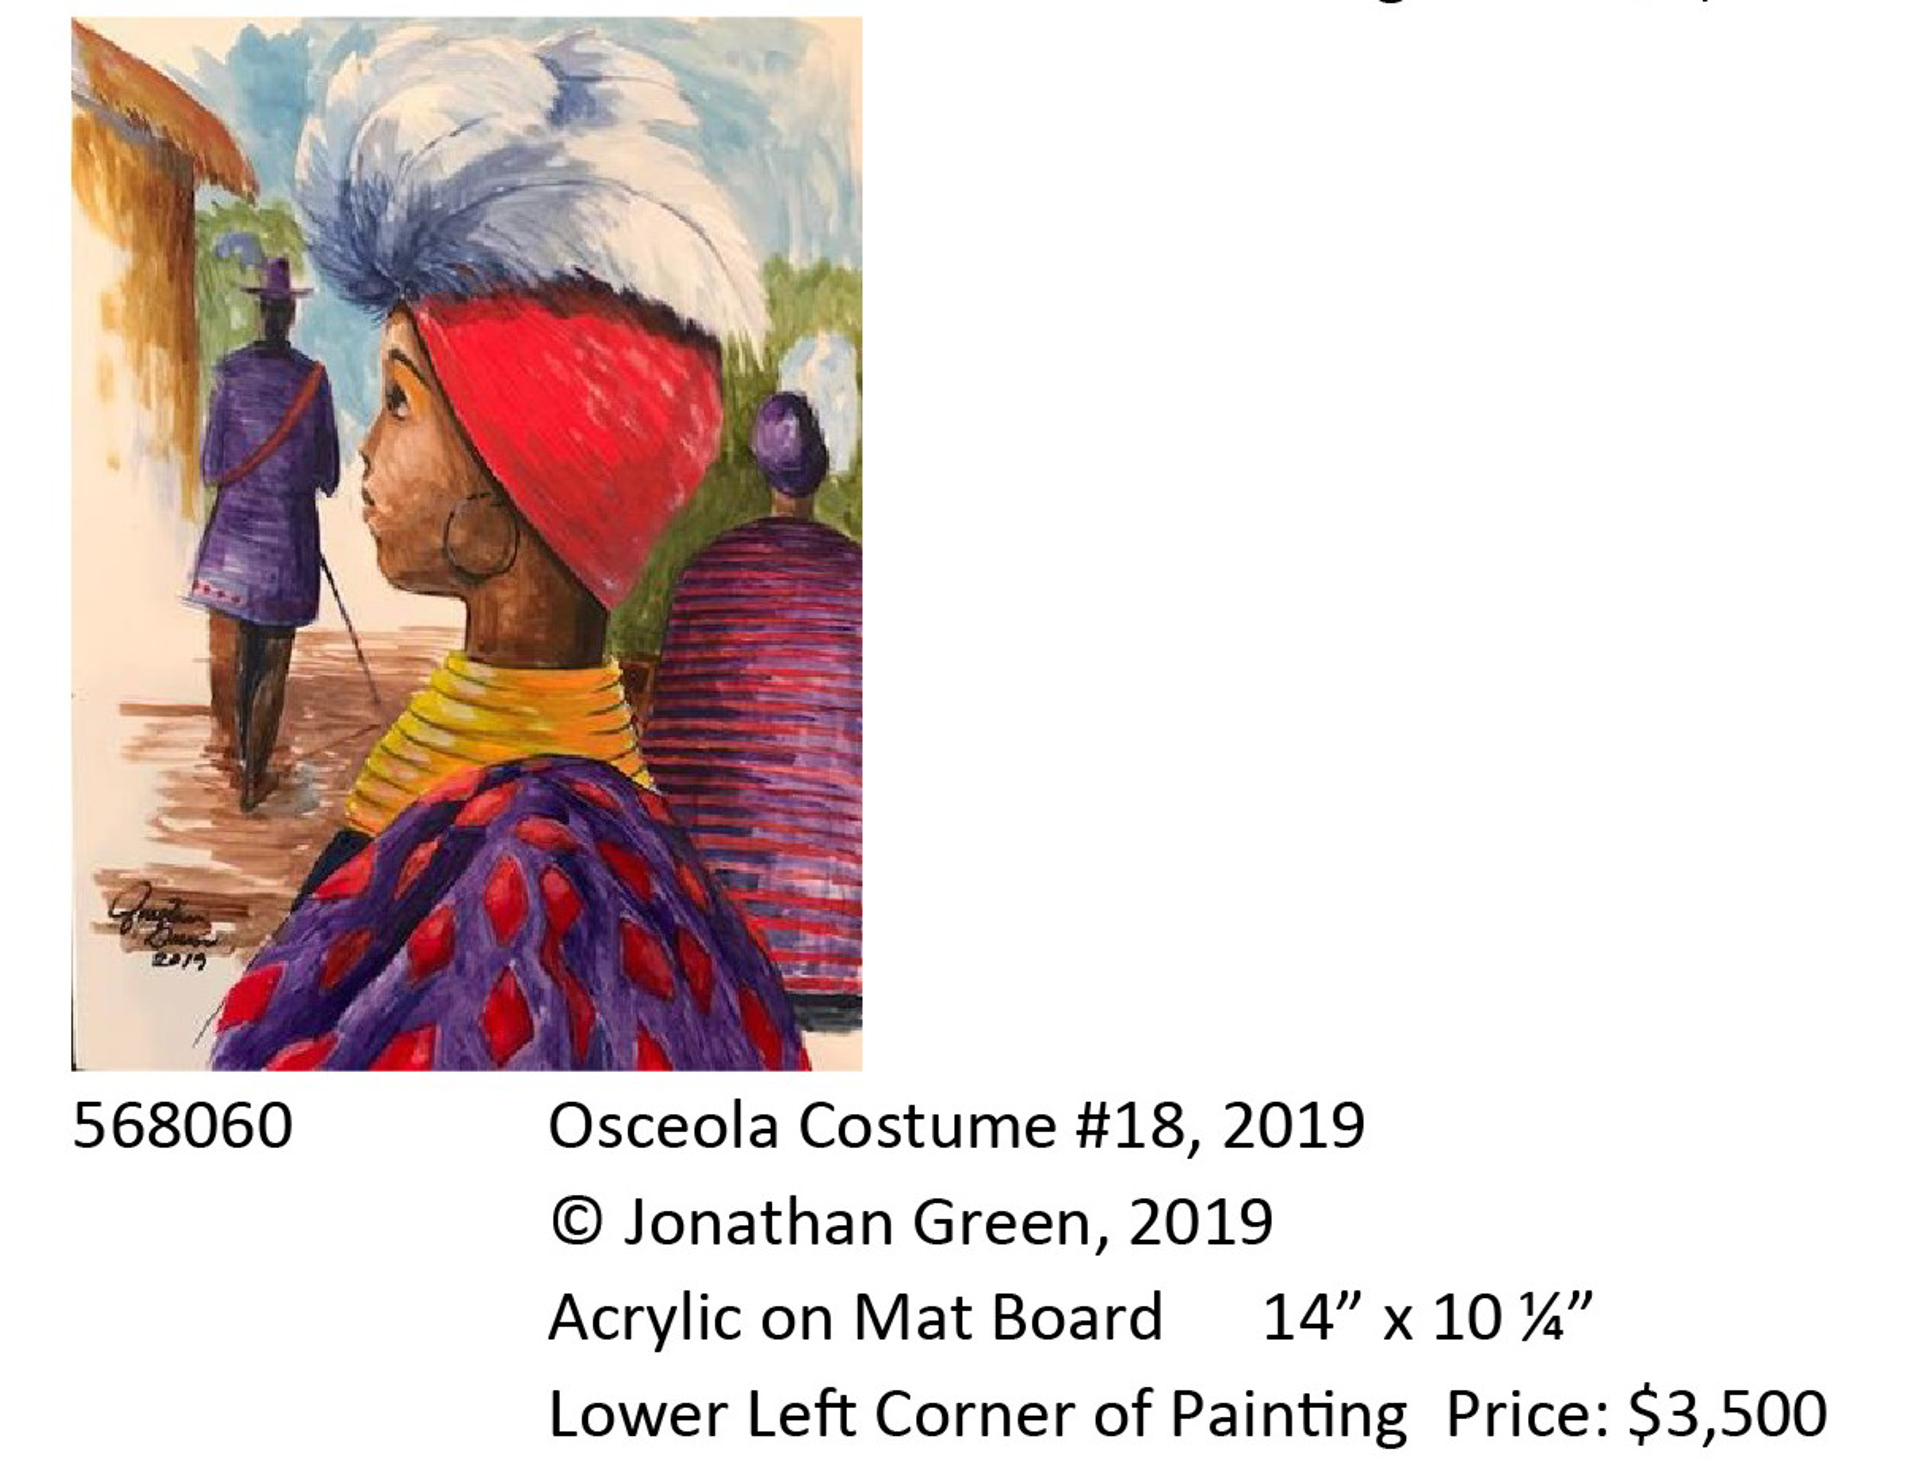 Osceola Costume #18 by Jonathan Green - Pop-Up Event